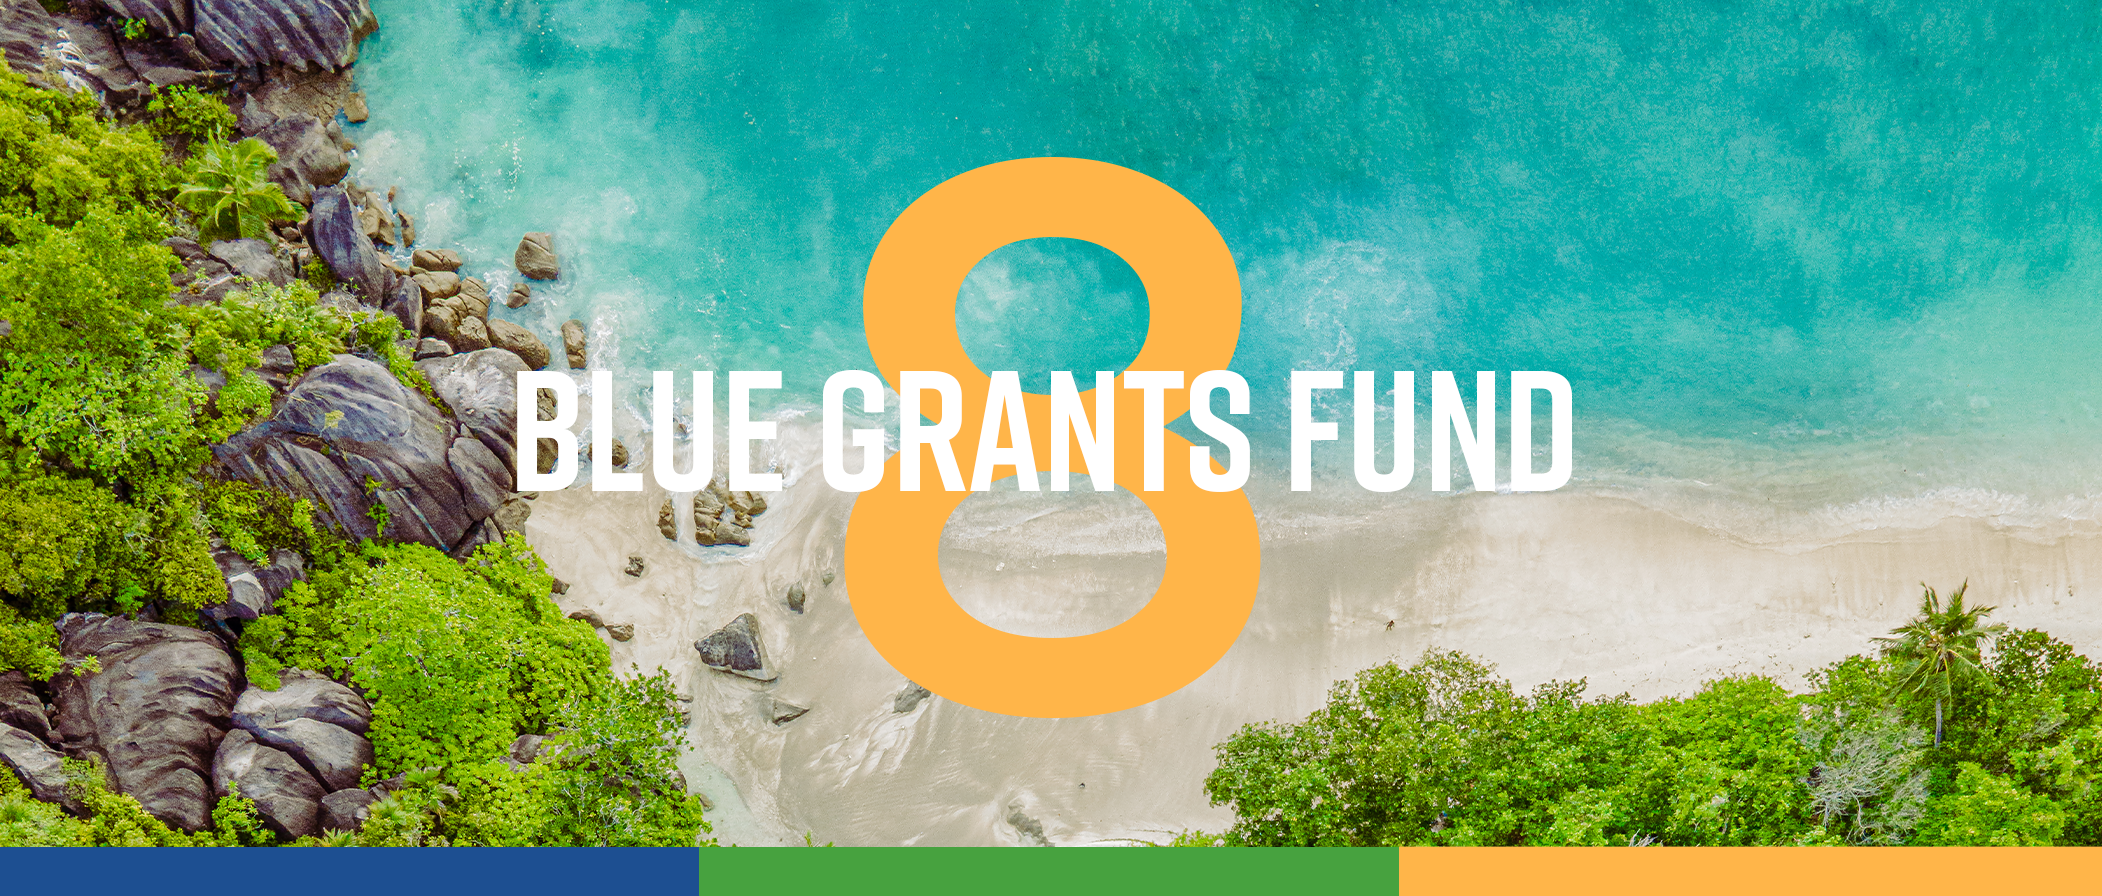 The Blue Grants Fund 8 is open!